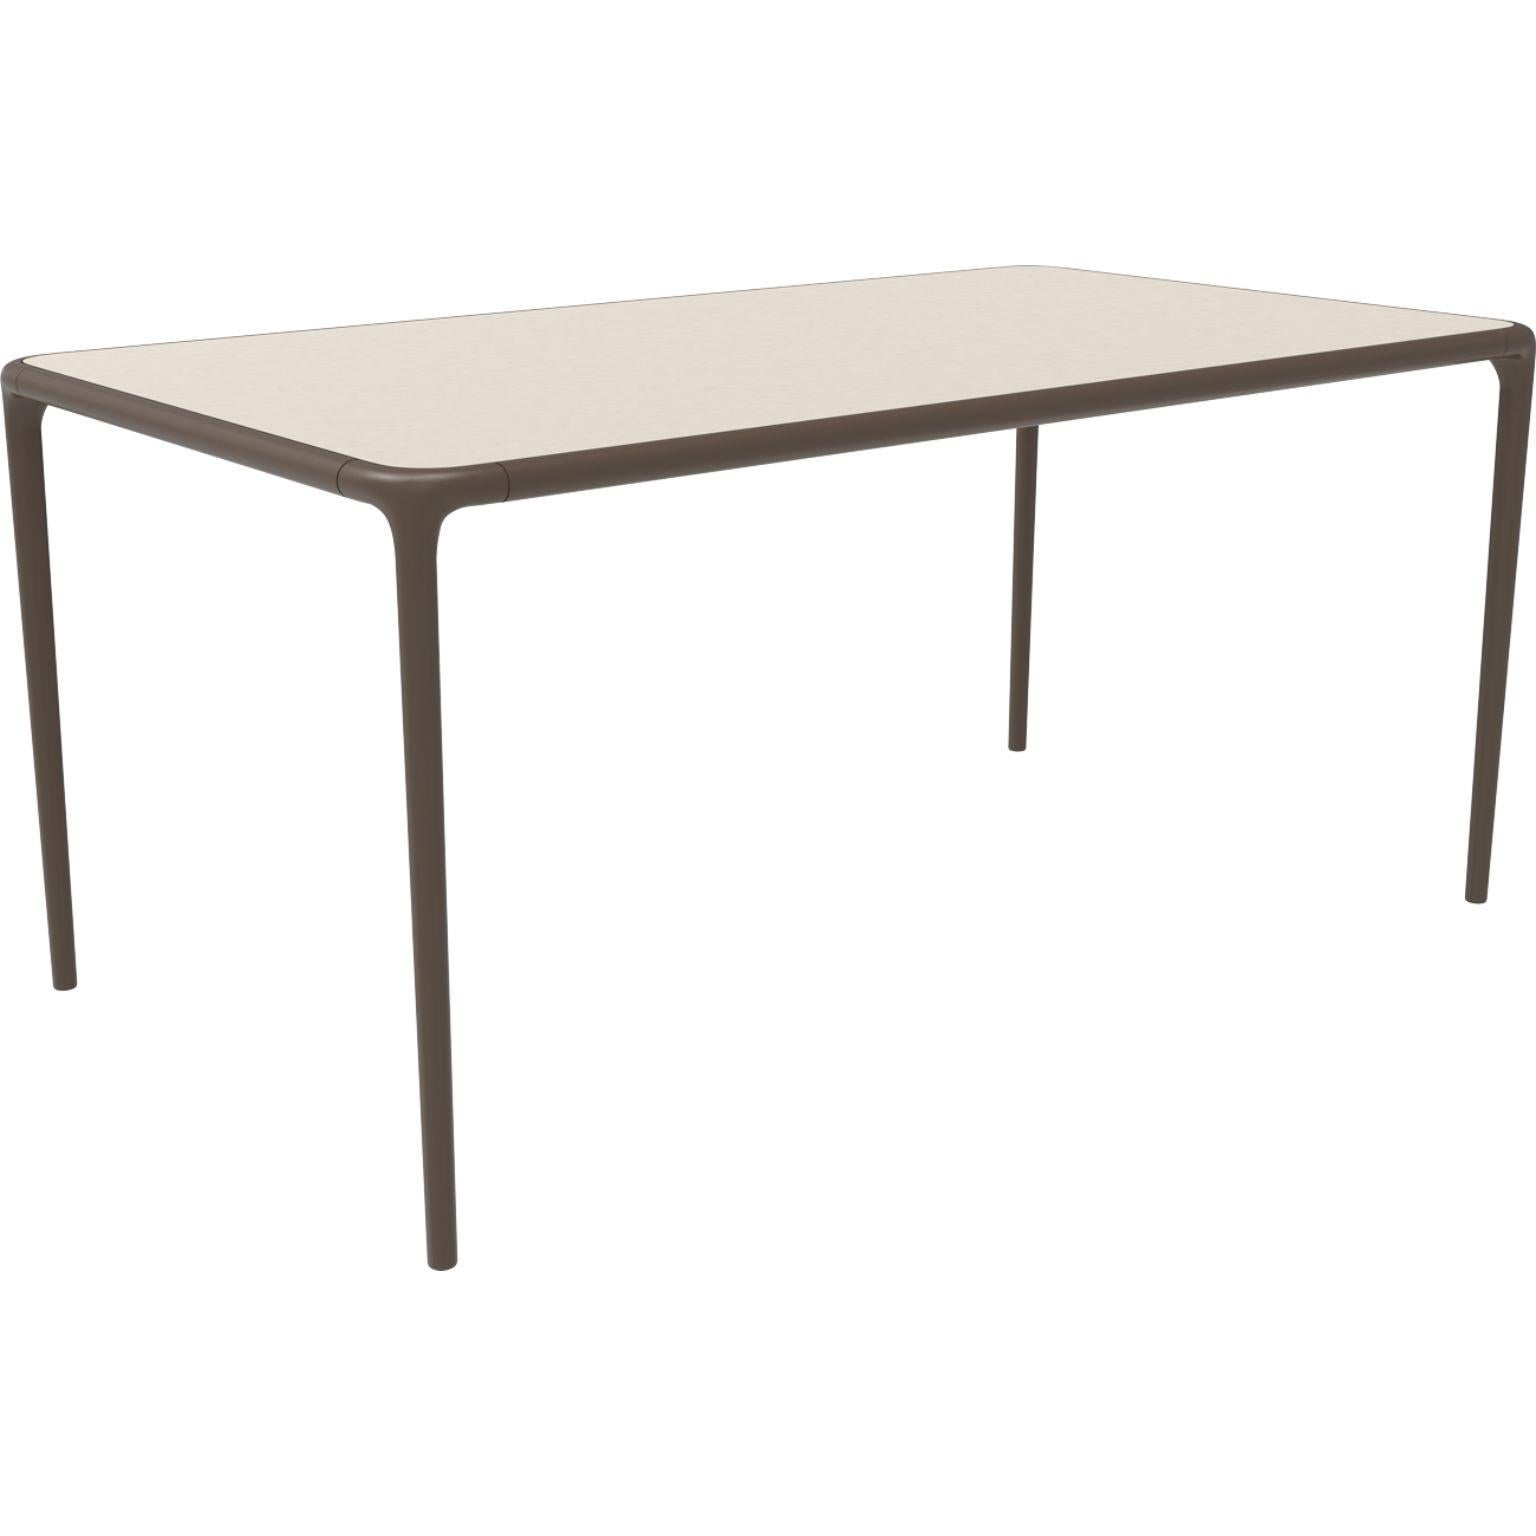 Xaloc bronze glass top table 160 by Mowee
Dimensions: D 160 x W 90 x H 74 cm
Material: Aluminum, tinted tempered glass top.
Also available in different aluminum colors and finishes (HPL Black Edge or Neolith).

Xaloc synthesizes the lines of